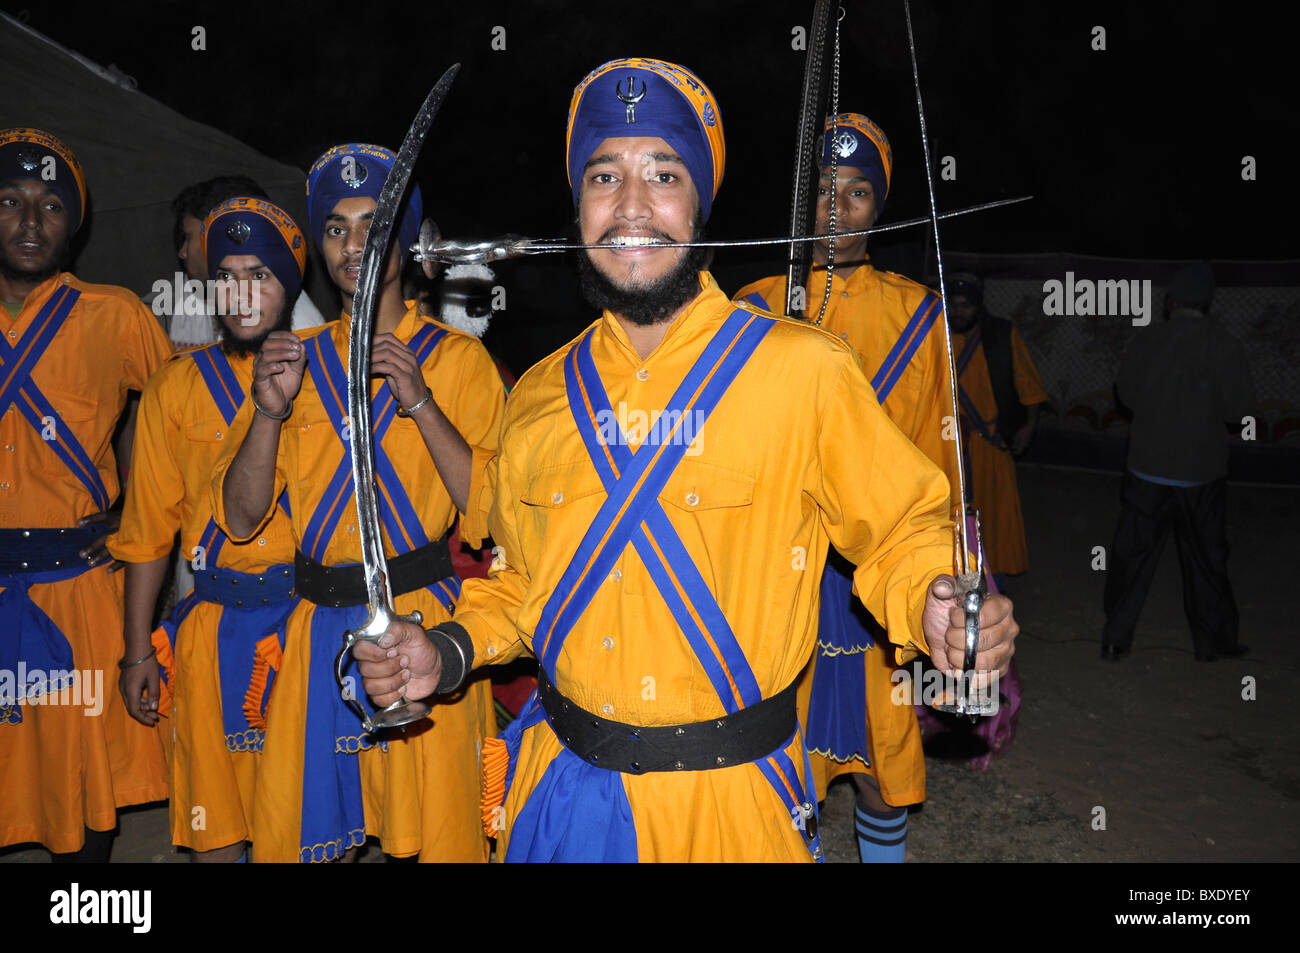 A group of sikhs performing on stage Stock Photo